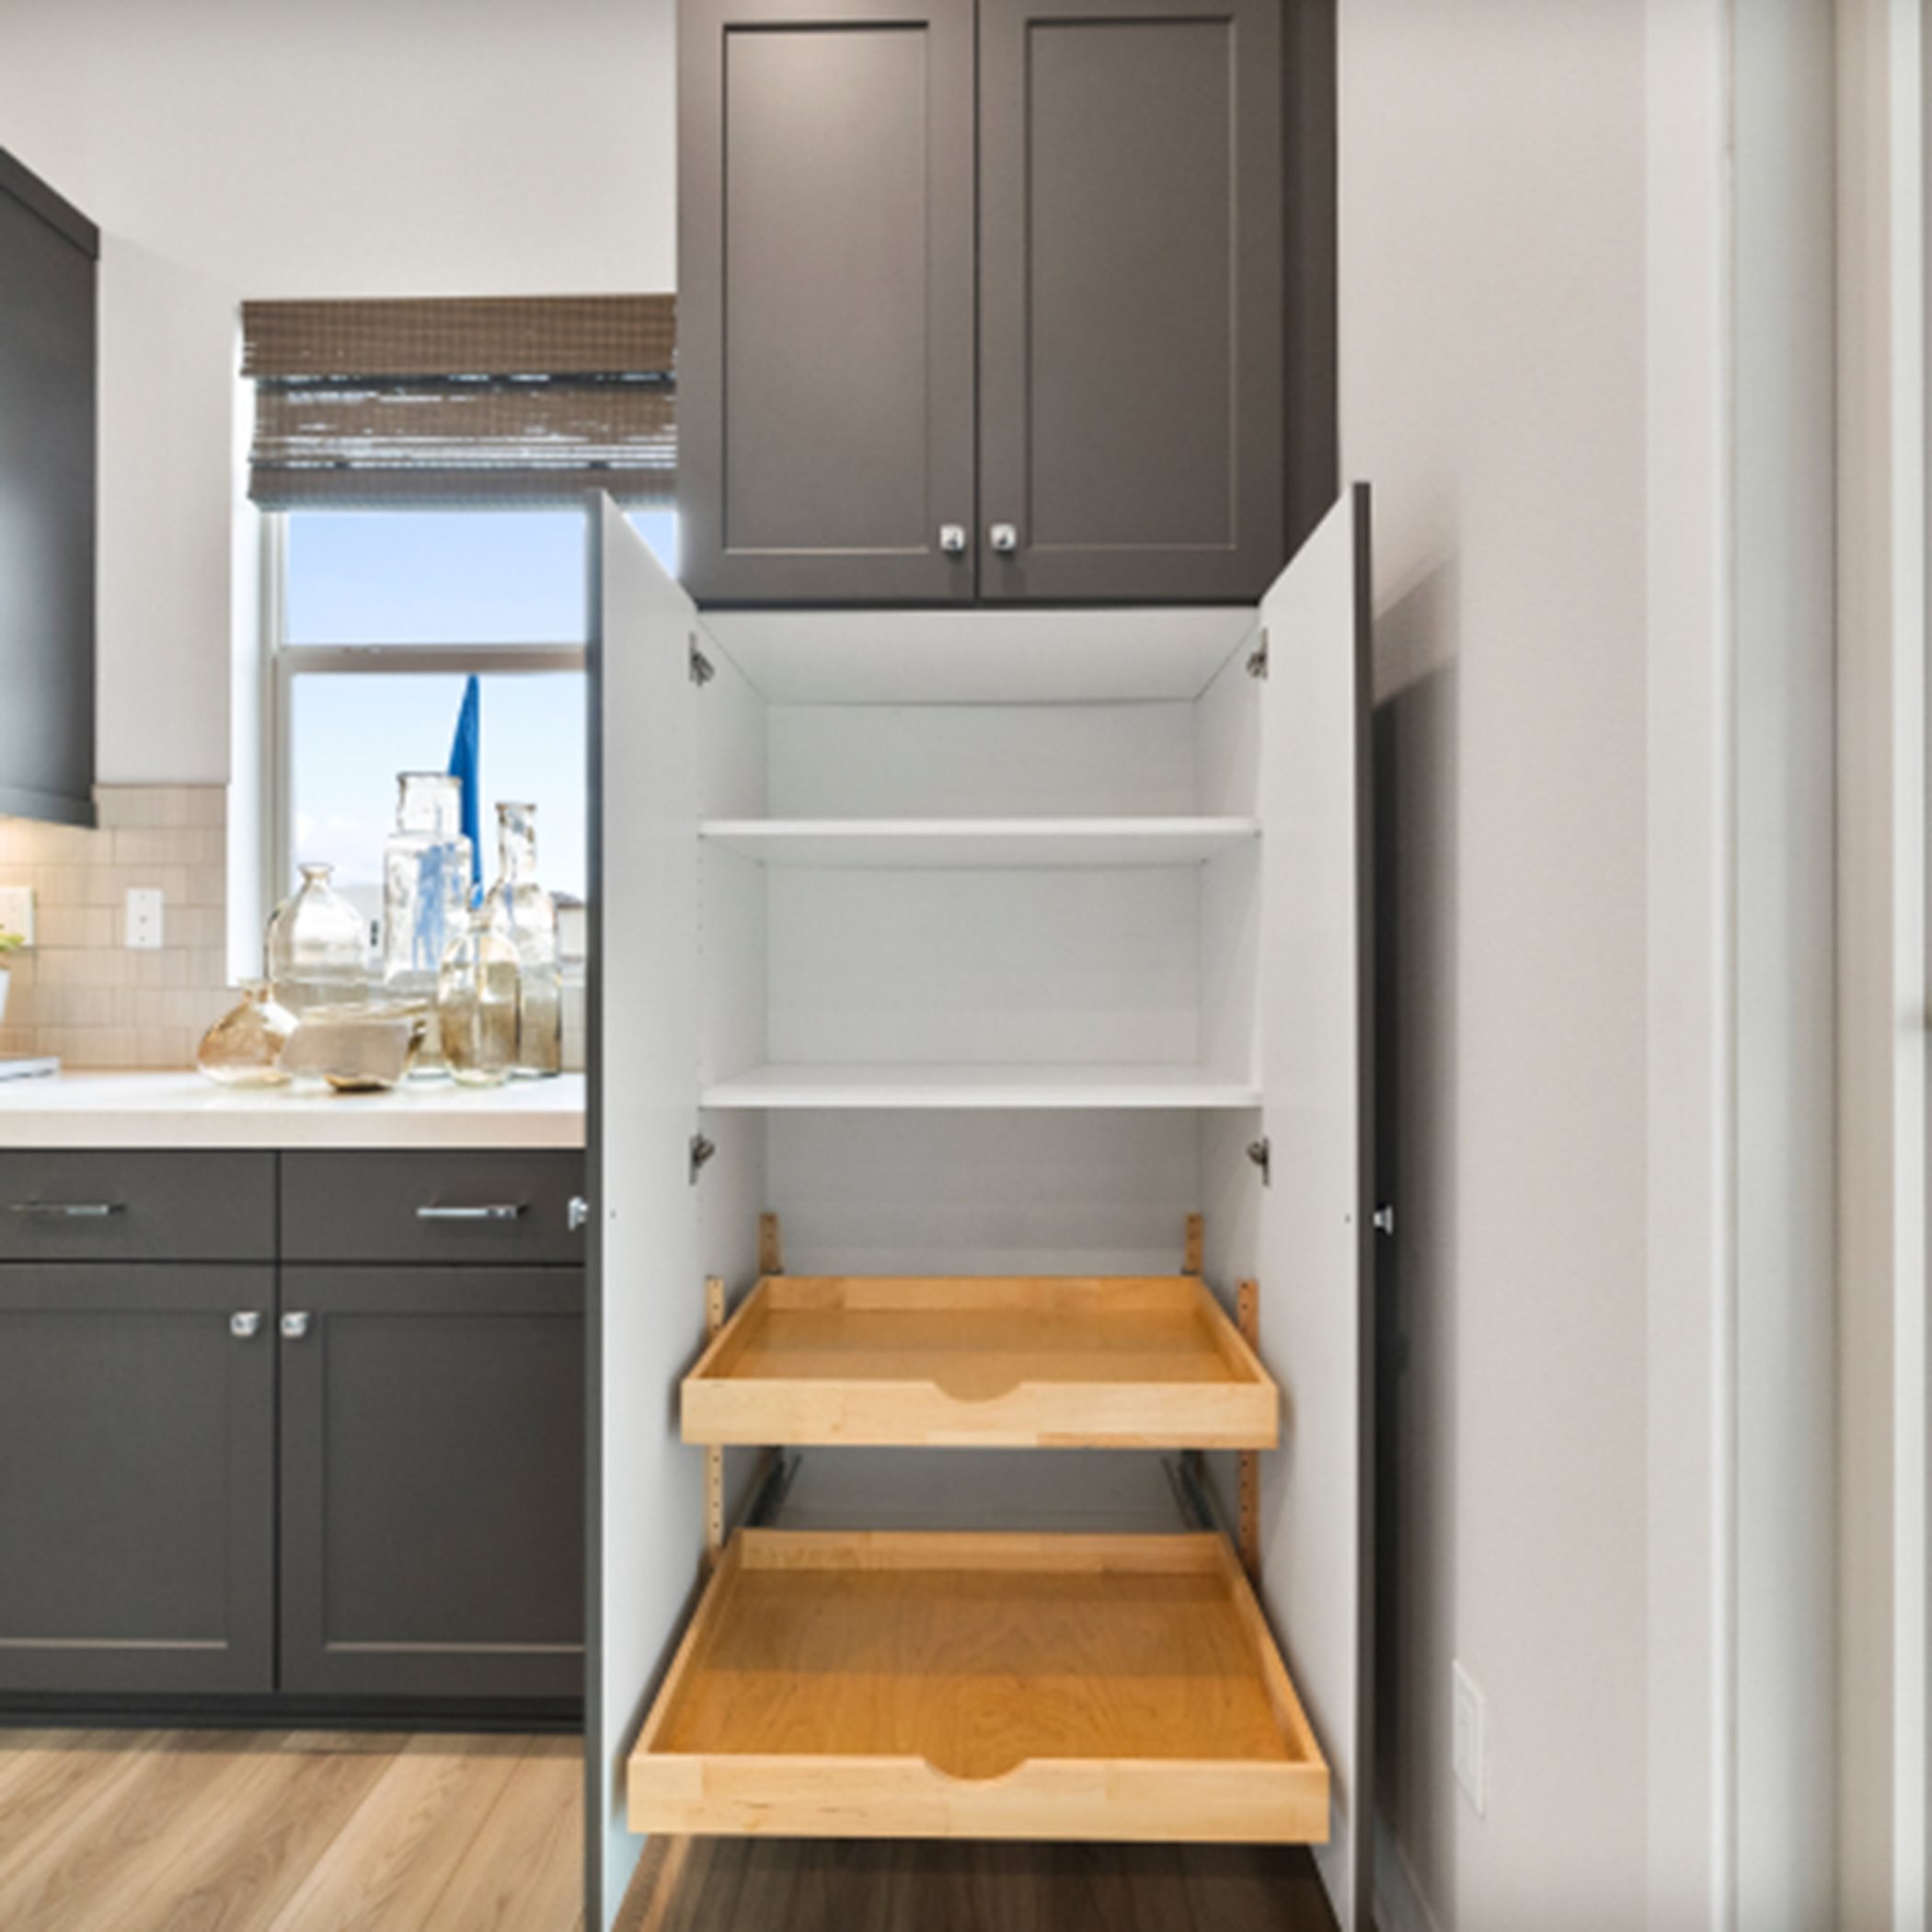 Storage with built-in shelving